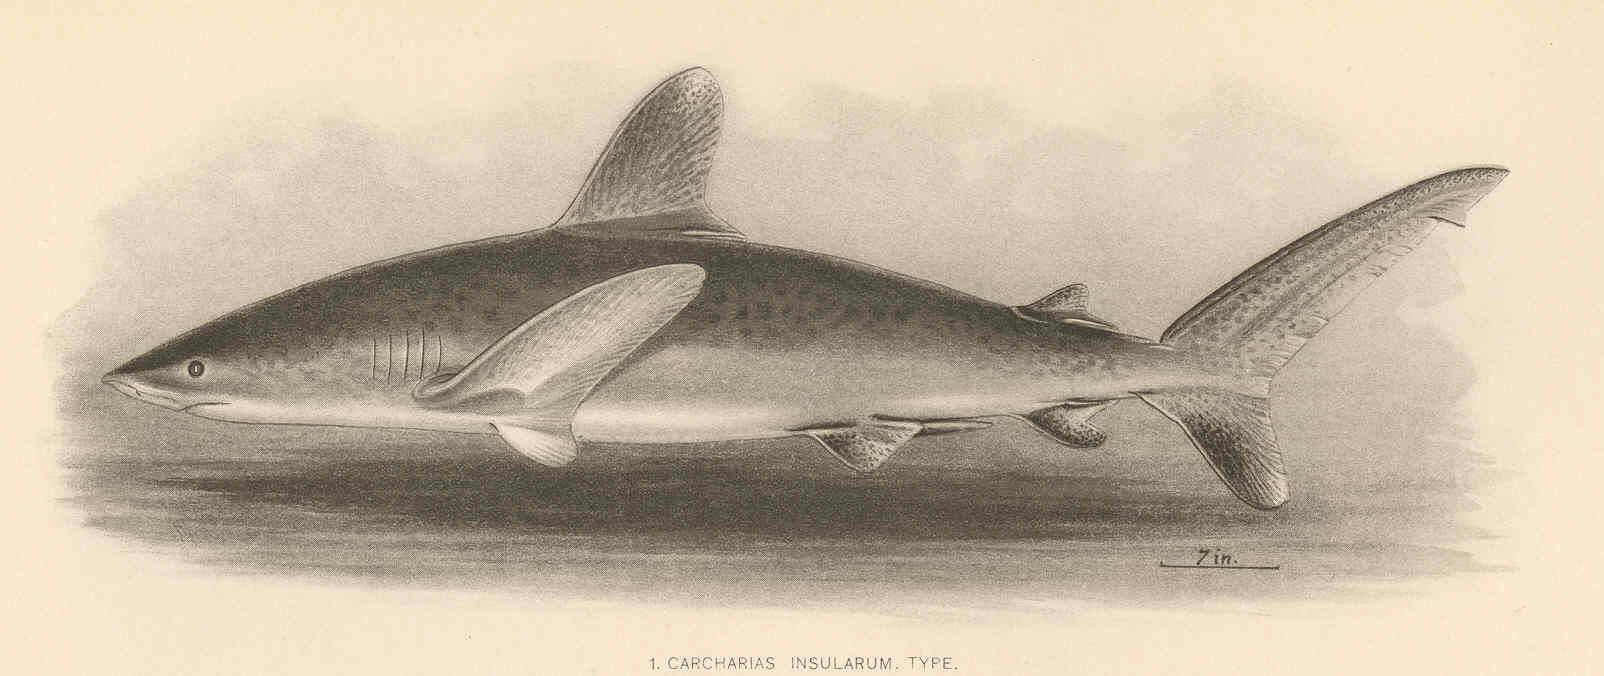 Image of "sharks, skates and rays"